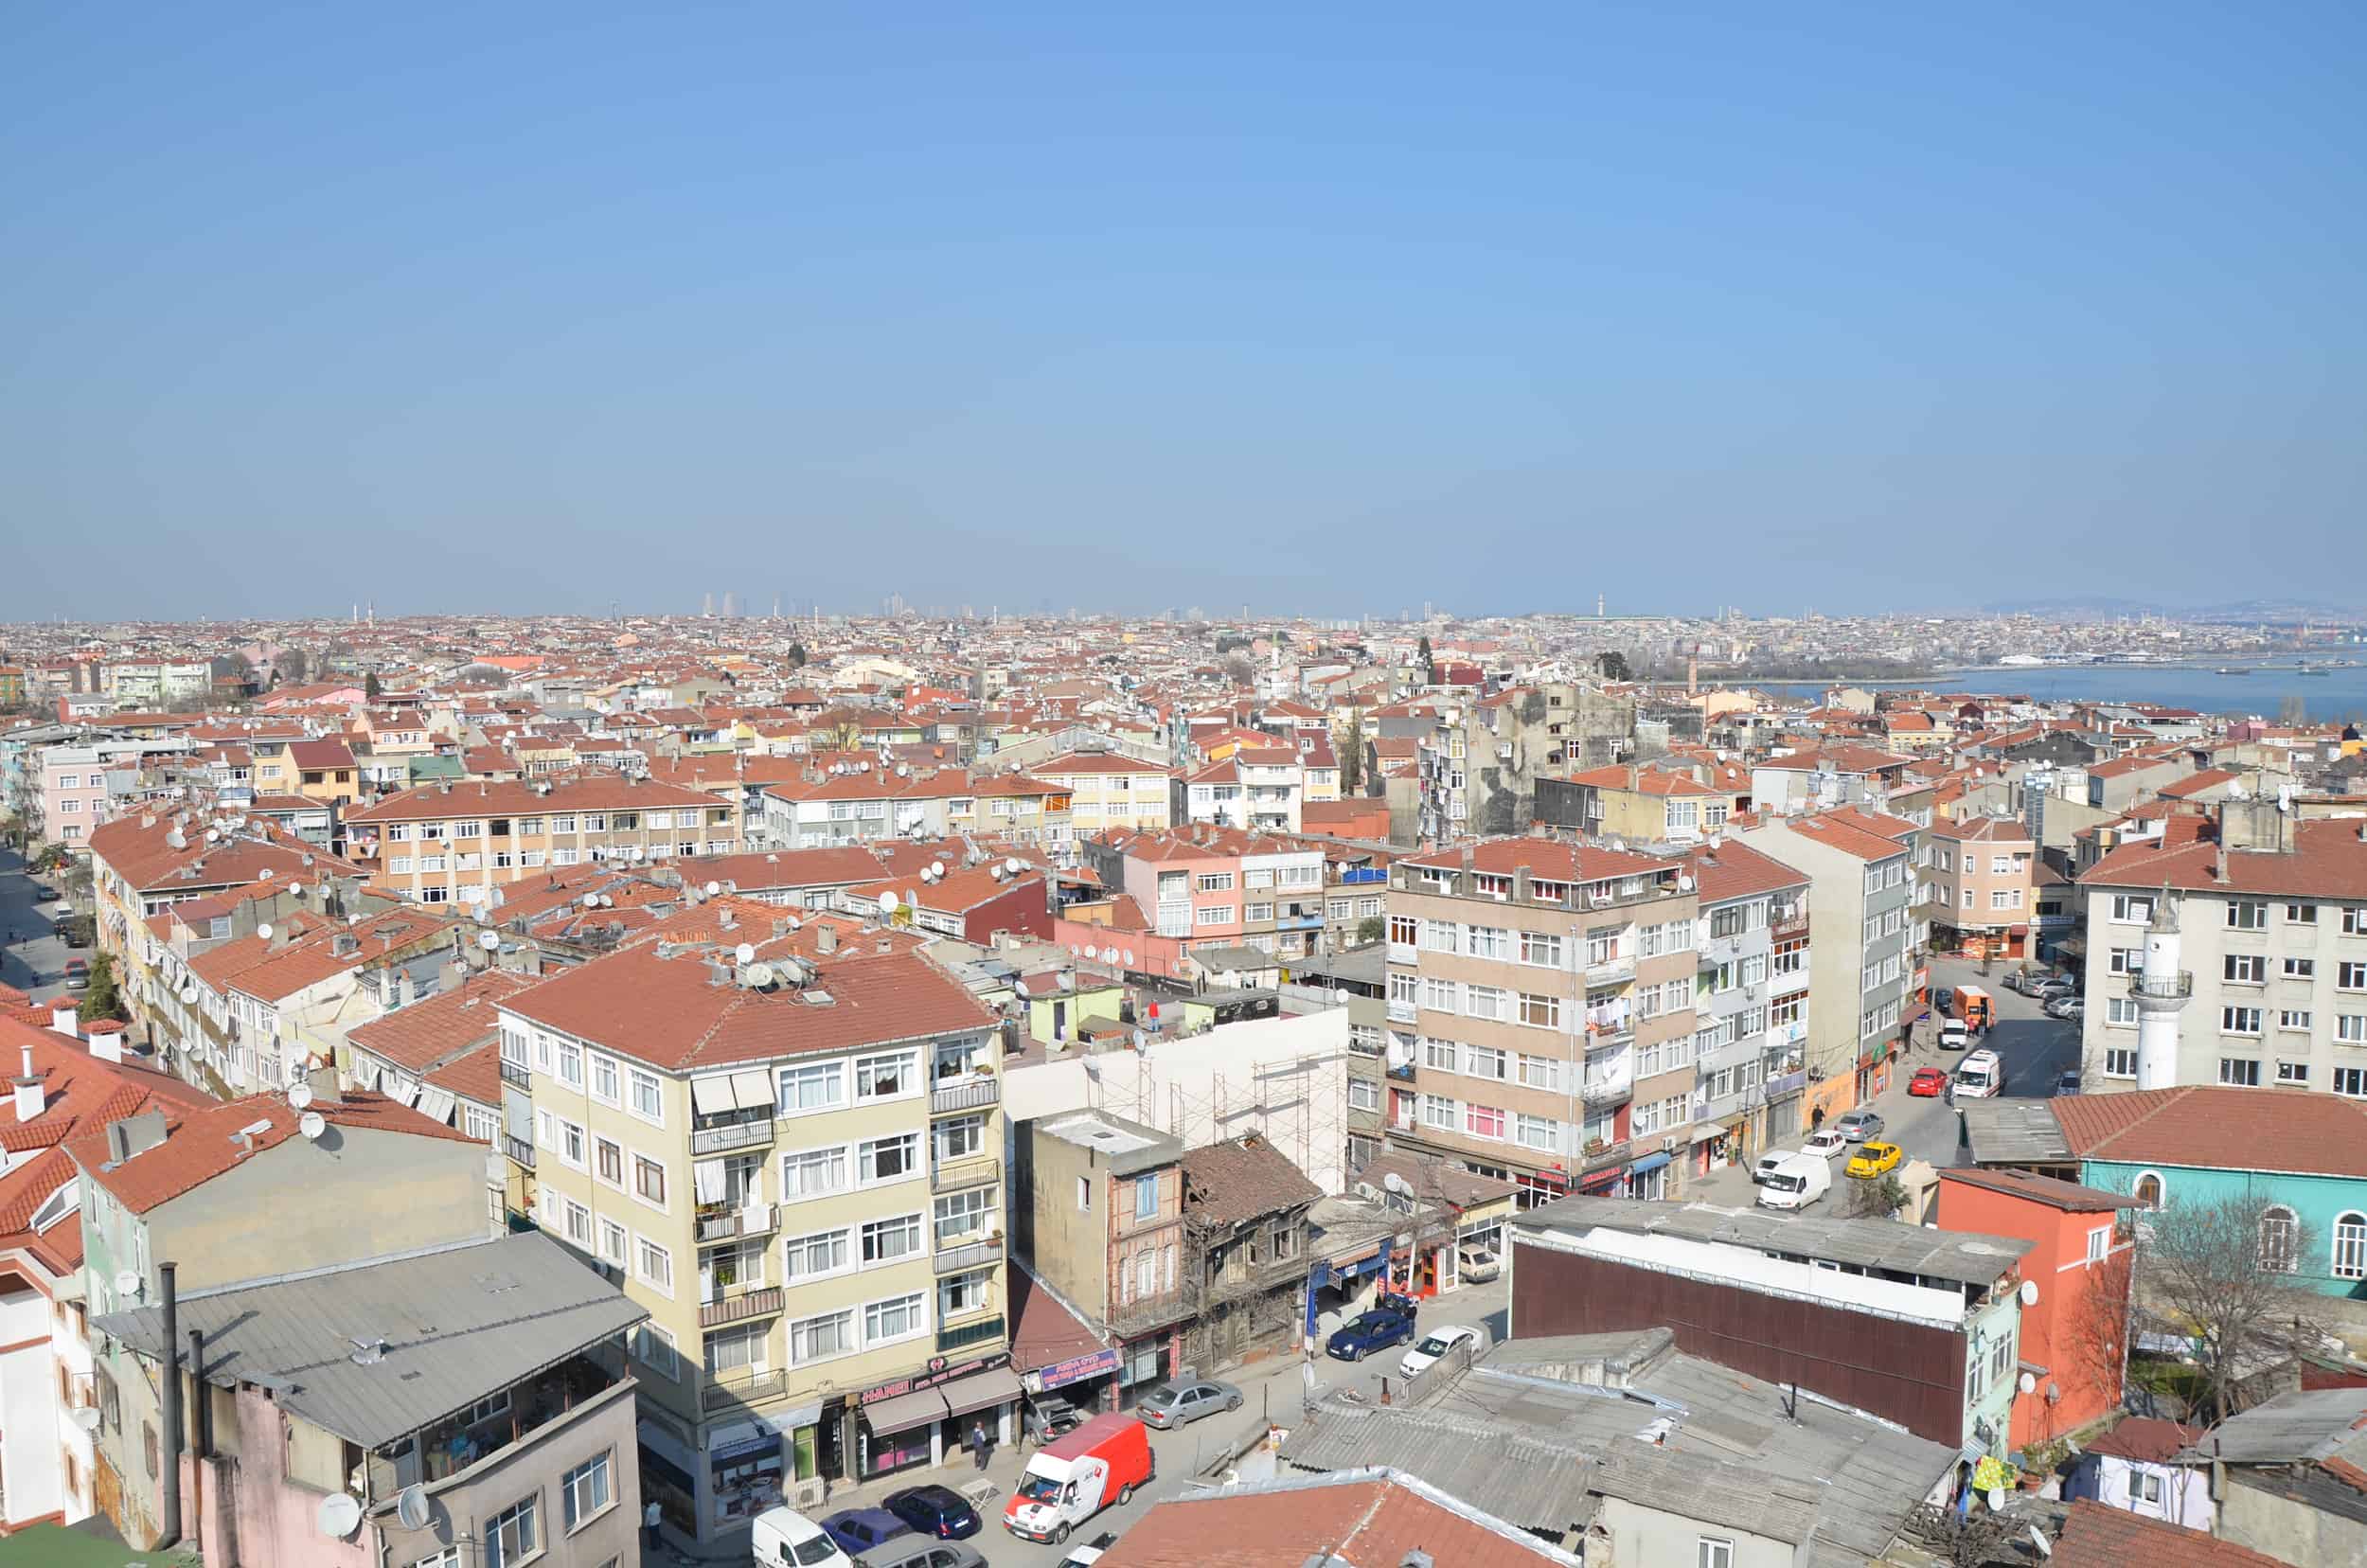 View of the Fatih district